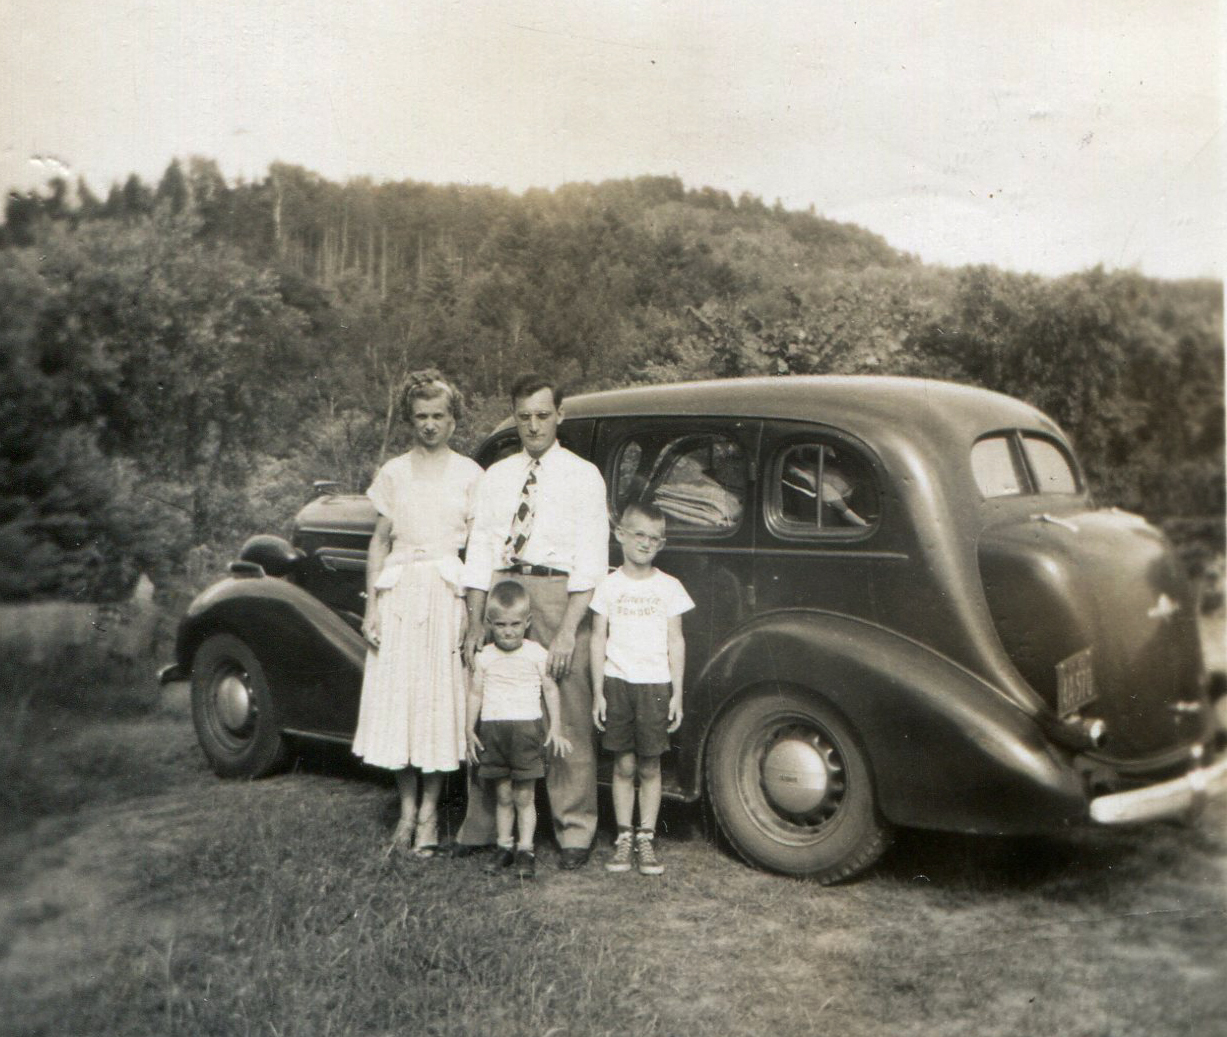 Eric and his younger brother, Alan, pose with their parents Franklin and Carolyn Mussen. The brothers were born in Schenectady, New York. (Family photo)